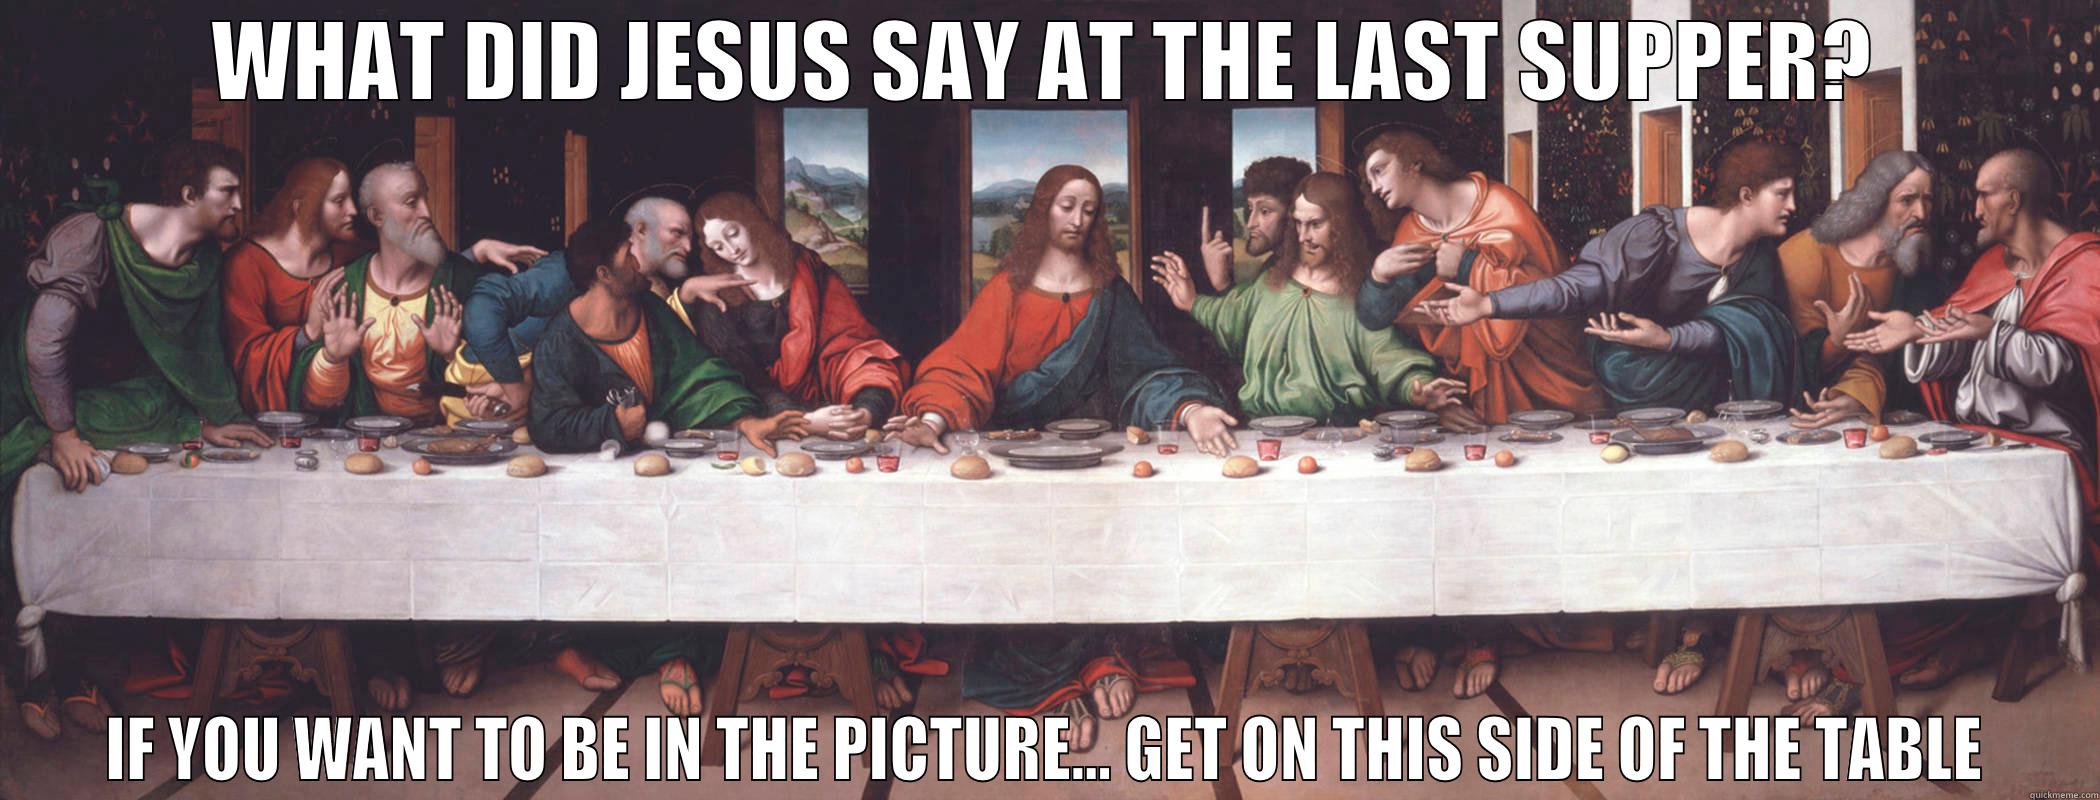 WHAT DID JESUS SAY AT THE LAST SUPPER? IF YOU WANT TO BE IN THE PICTURE... GET ON THIS SIDE OF THE TABLE Misc